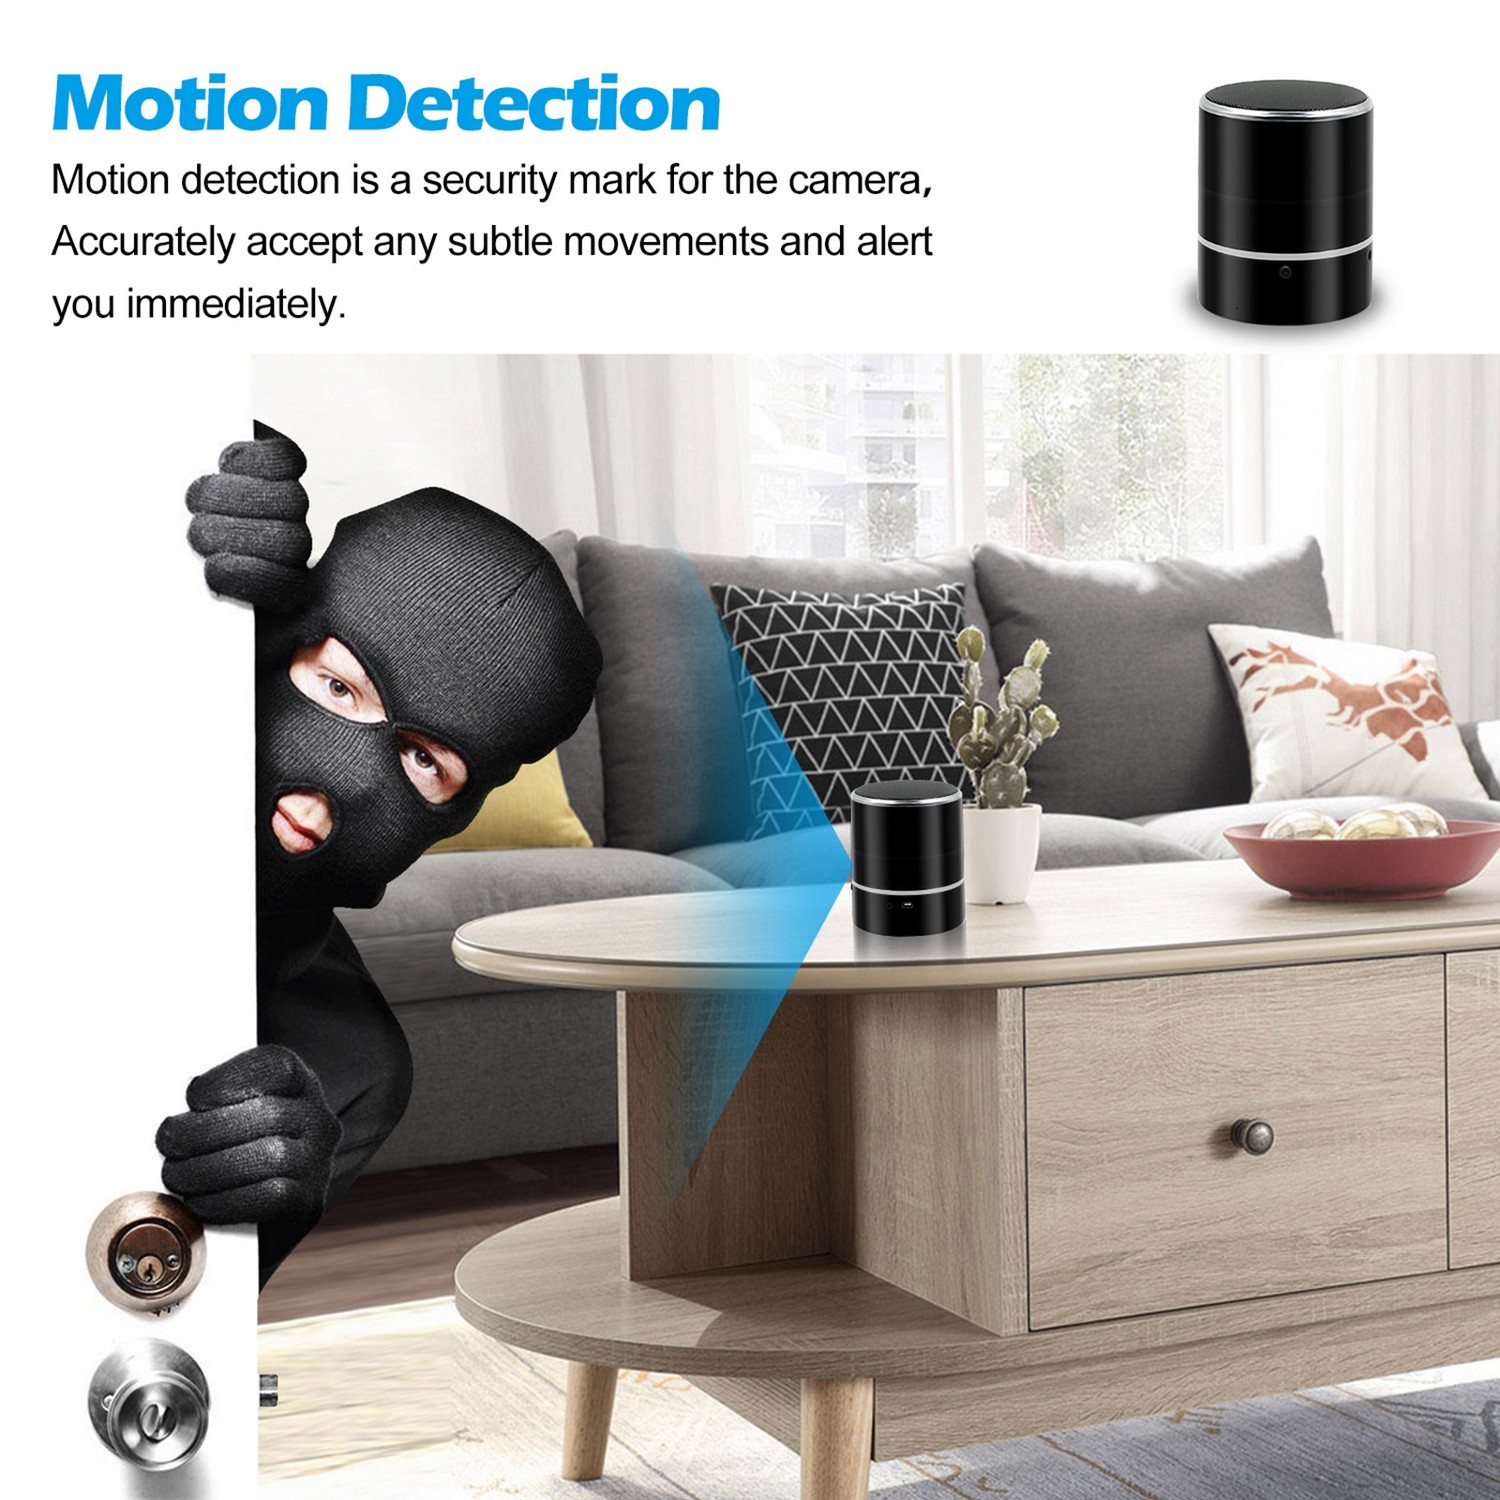 Speaker with hidden camera and motion detection